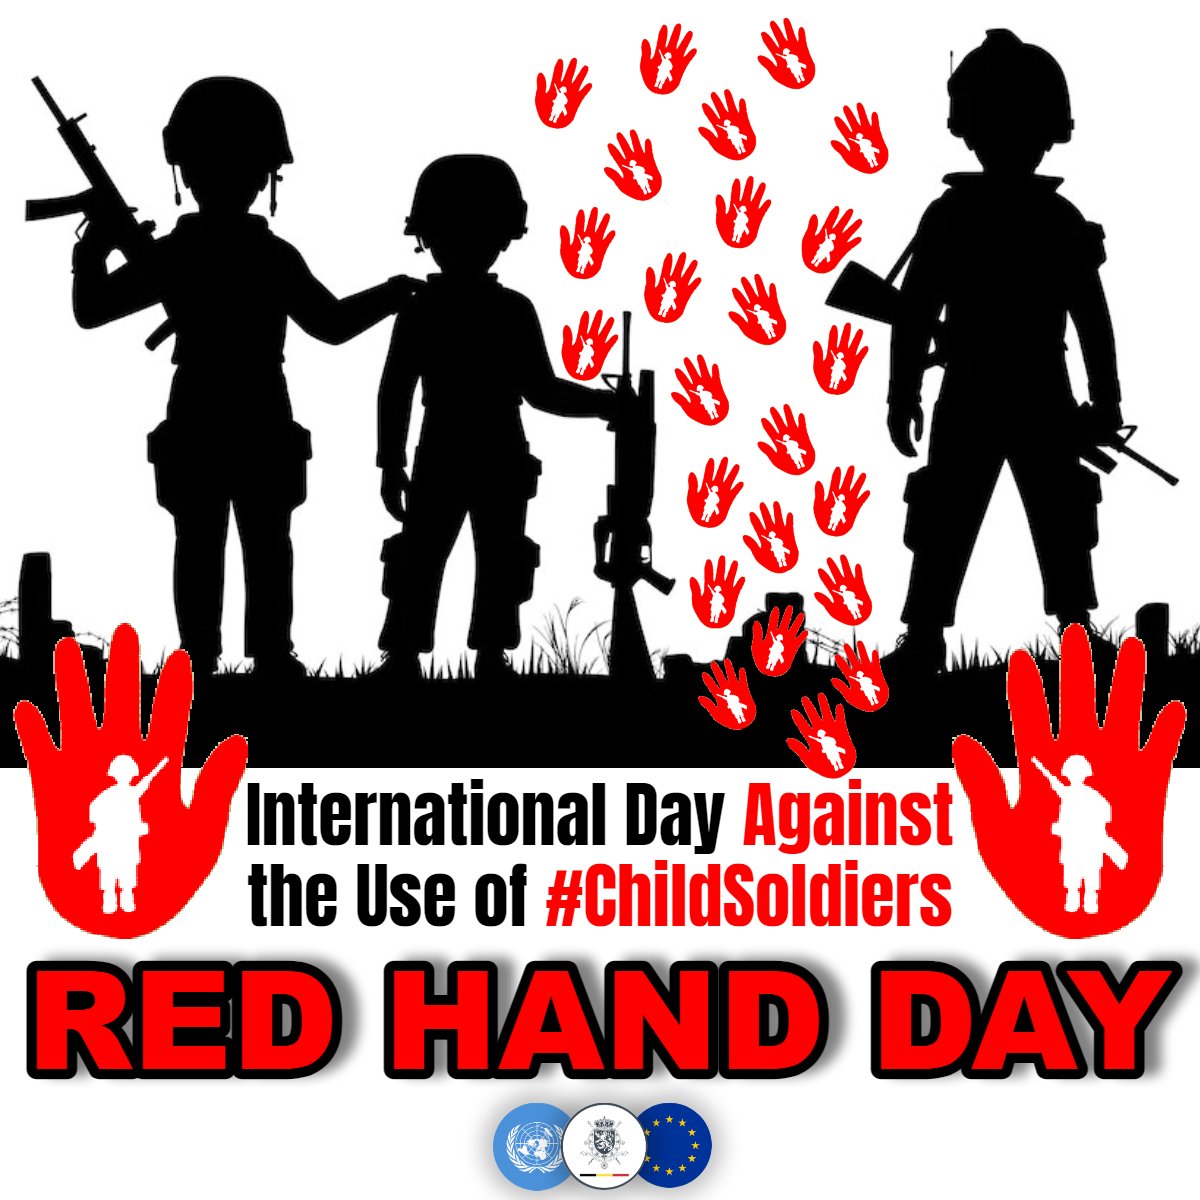 ✋🔴 Today is the International Day Against the Use of Child Soldiers . Join us in spreading the word that children have the right to be children, NOT soldiers. #ChildrenNotSoldiers #ACTtoProtect #RedHandDay

ℹ️ More details via: facebook.com/BelgianEmbassy…